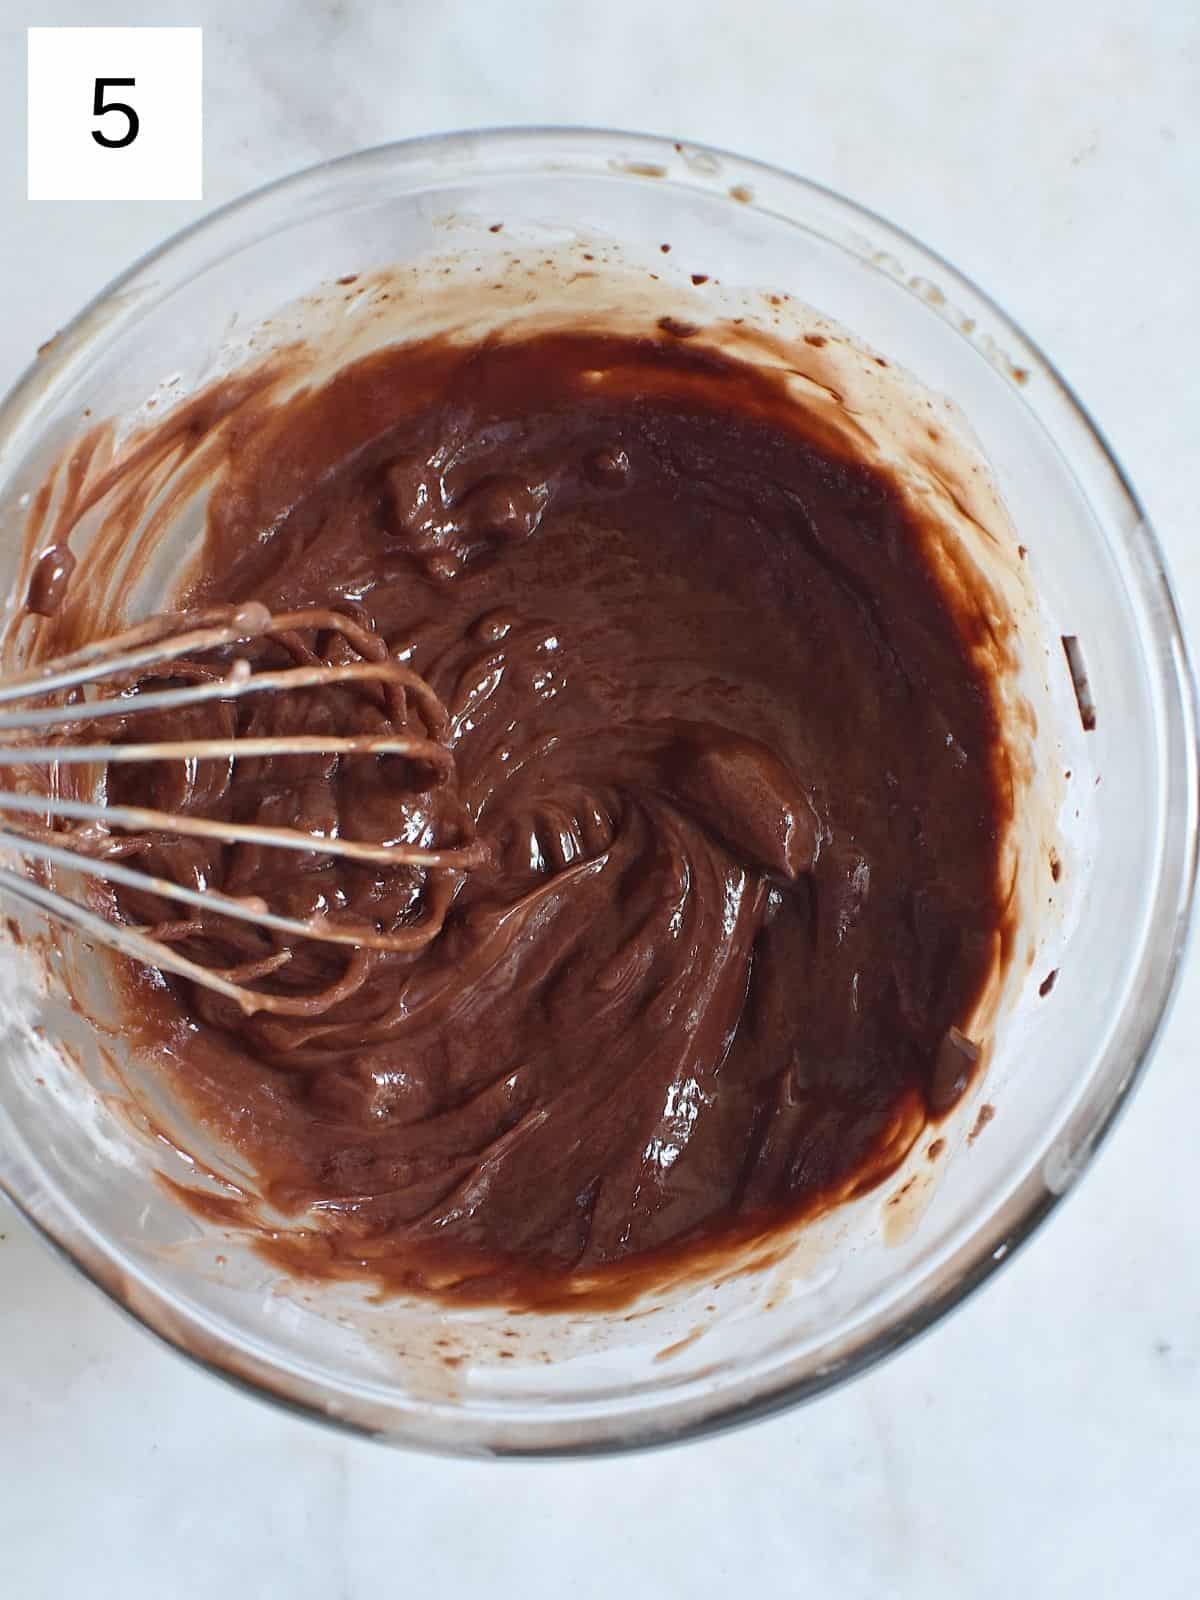 melted mixture of milk and chocolate in a mixing bowl.